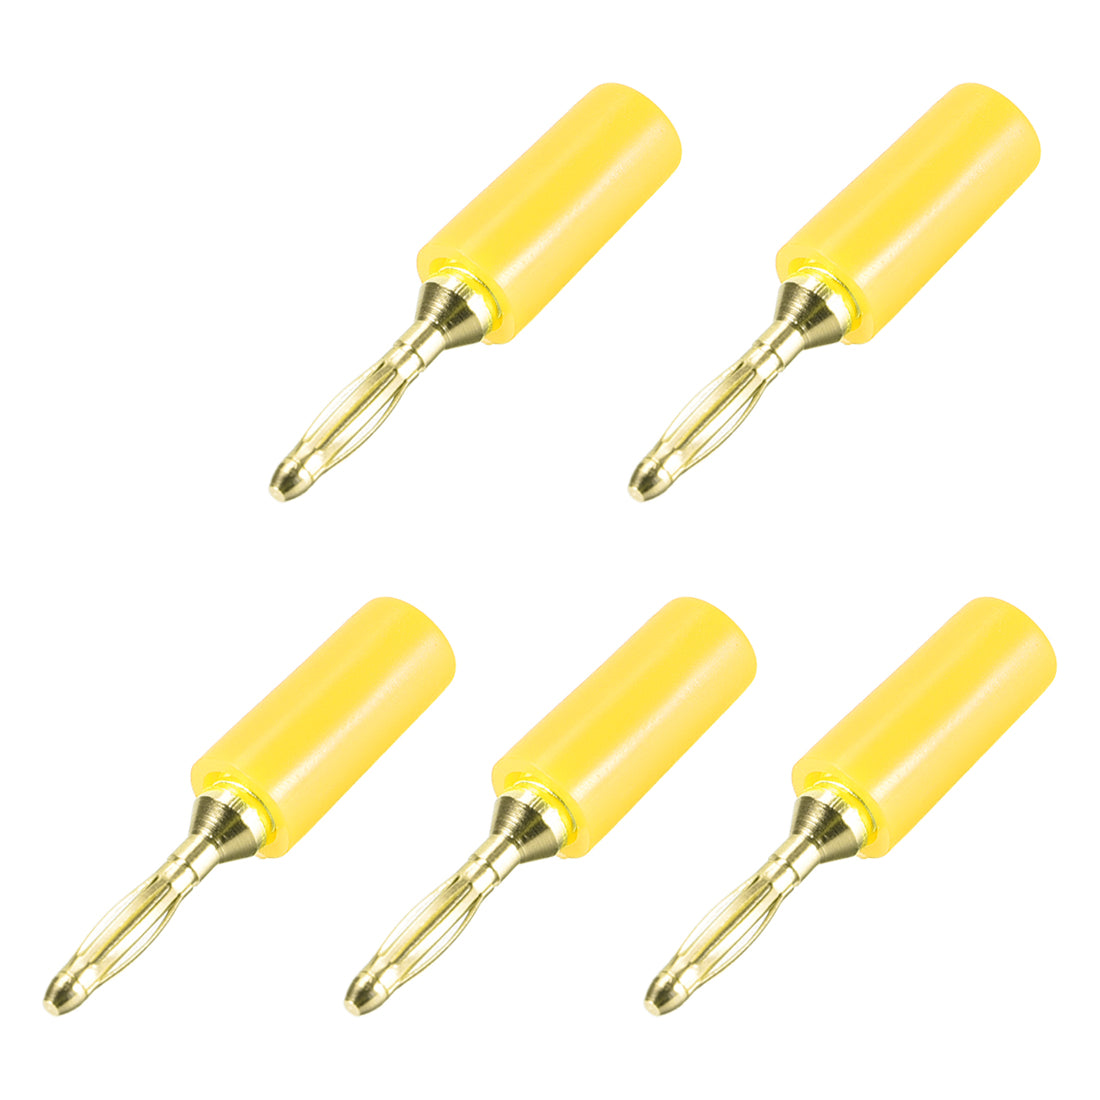 uxcell Uxcell 2mm Banana Speaker Wire Cable Plugs Connectors Gold Yellow 5pcs Jack Connector